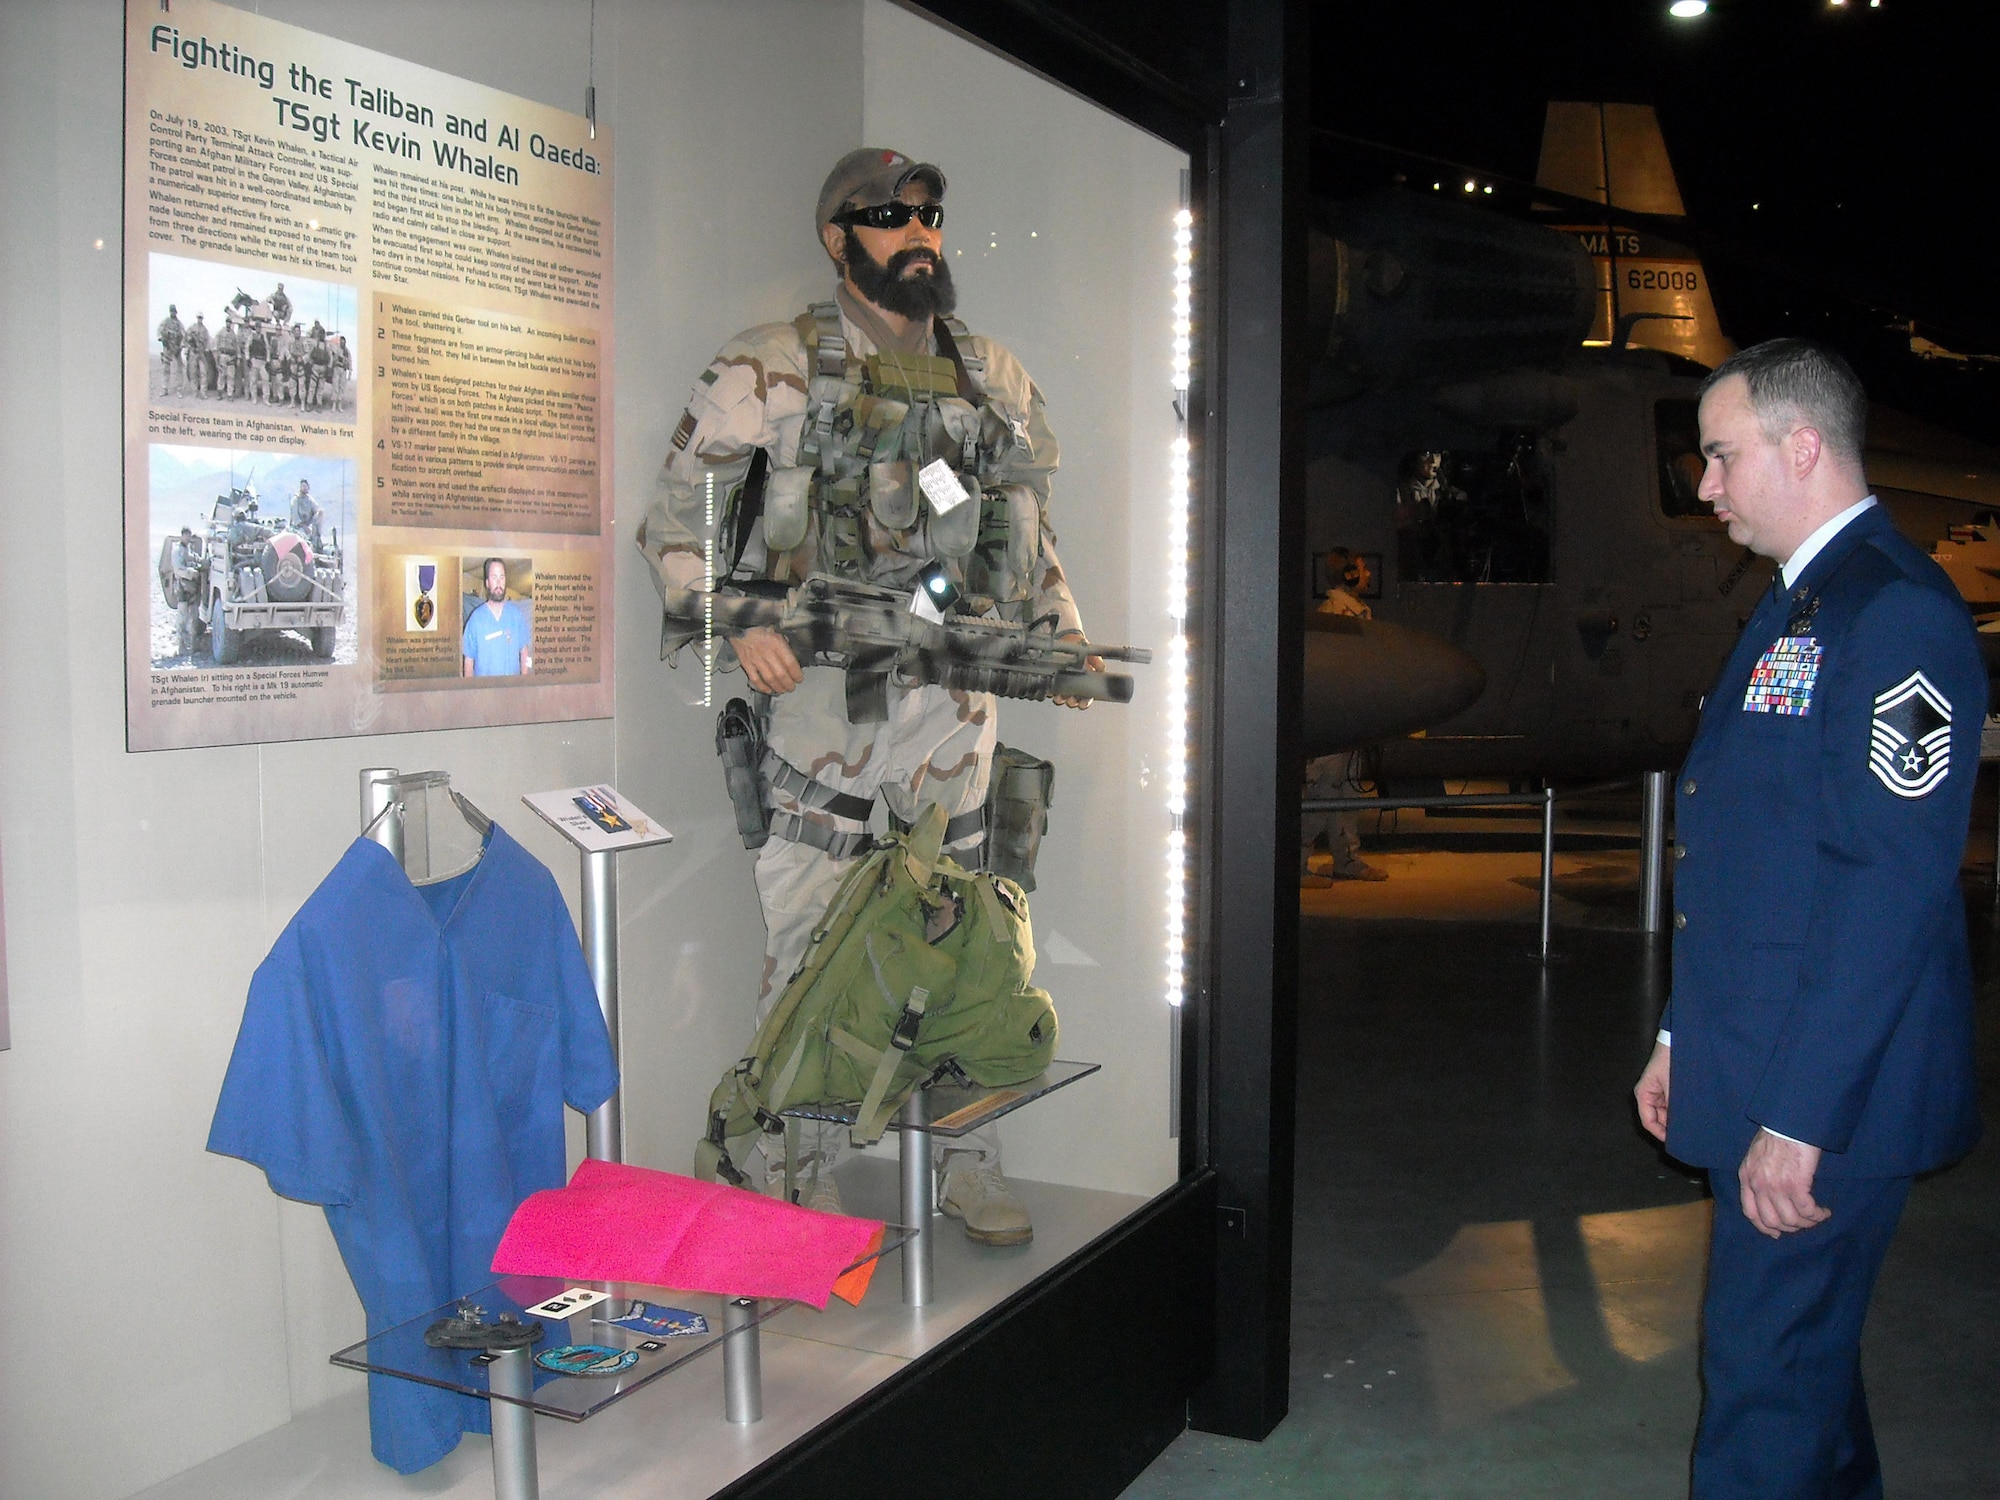 Senior Master Sergeant (SMSgt) Kevin Whalen views a display featuring a younger, bearded version of himself at the National Museum of the United States Air Force, Wright-Patterson AFB, Ohio on the opening night of the new "Warrior Airmen" exhibit there on January 12, 2009. The SMSgt Whalen display recalls his actions during an ambush in Afghanistan on July 19, 2003 in which he won a Purple Heart and Silver Star. (U.S. Air Force photo by Captain Lisa Dowling)